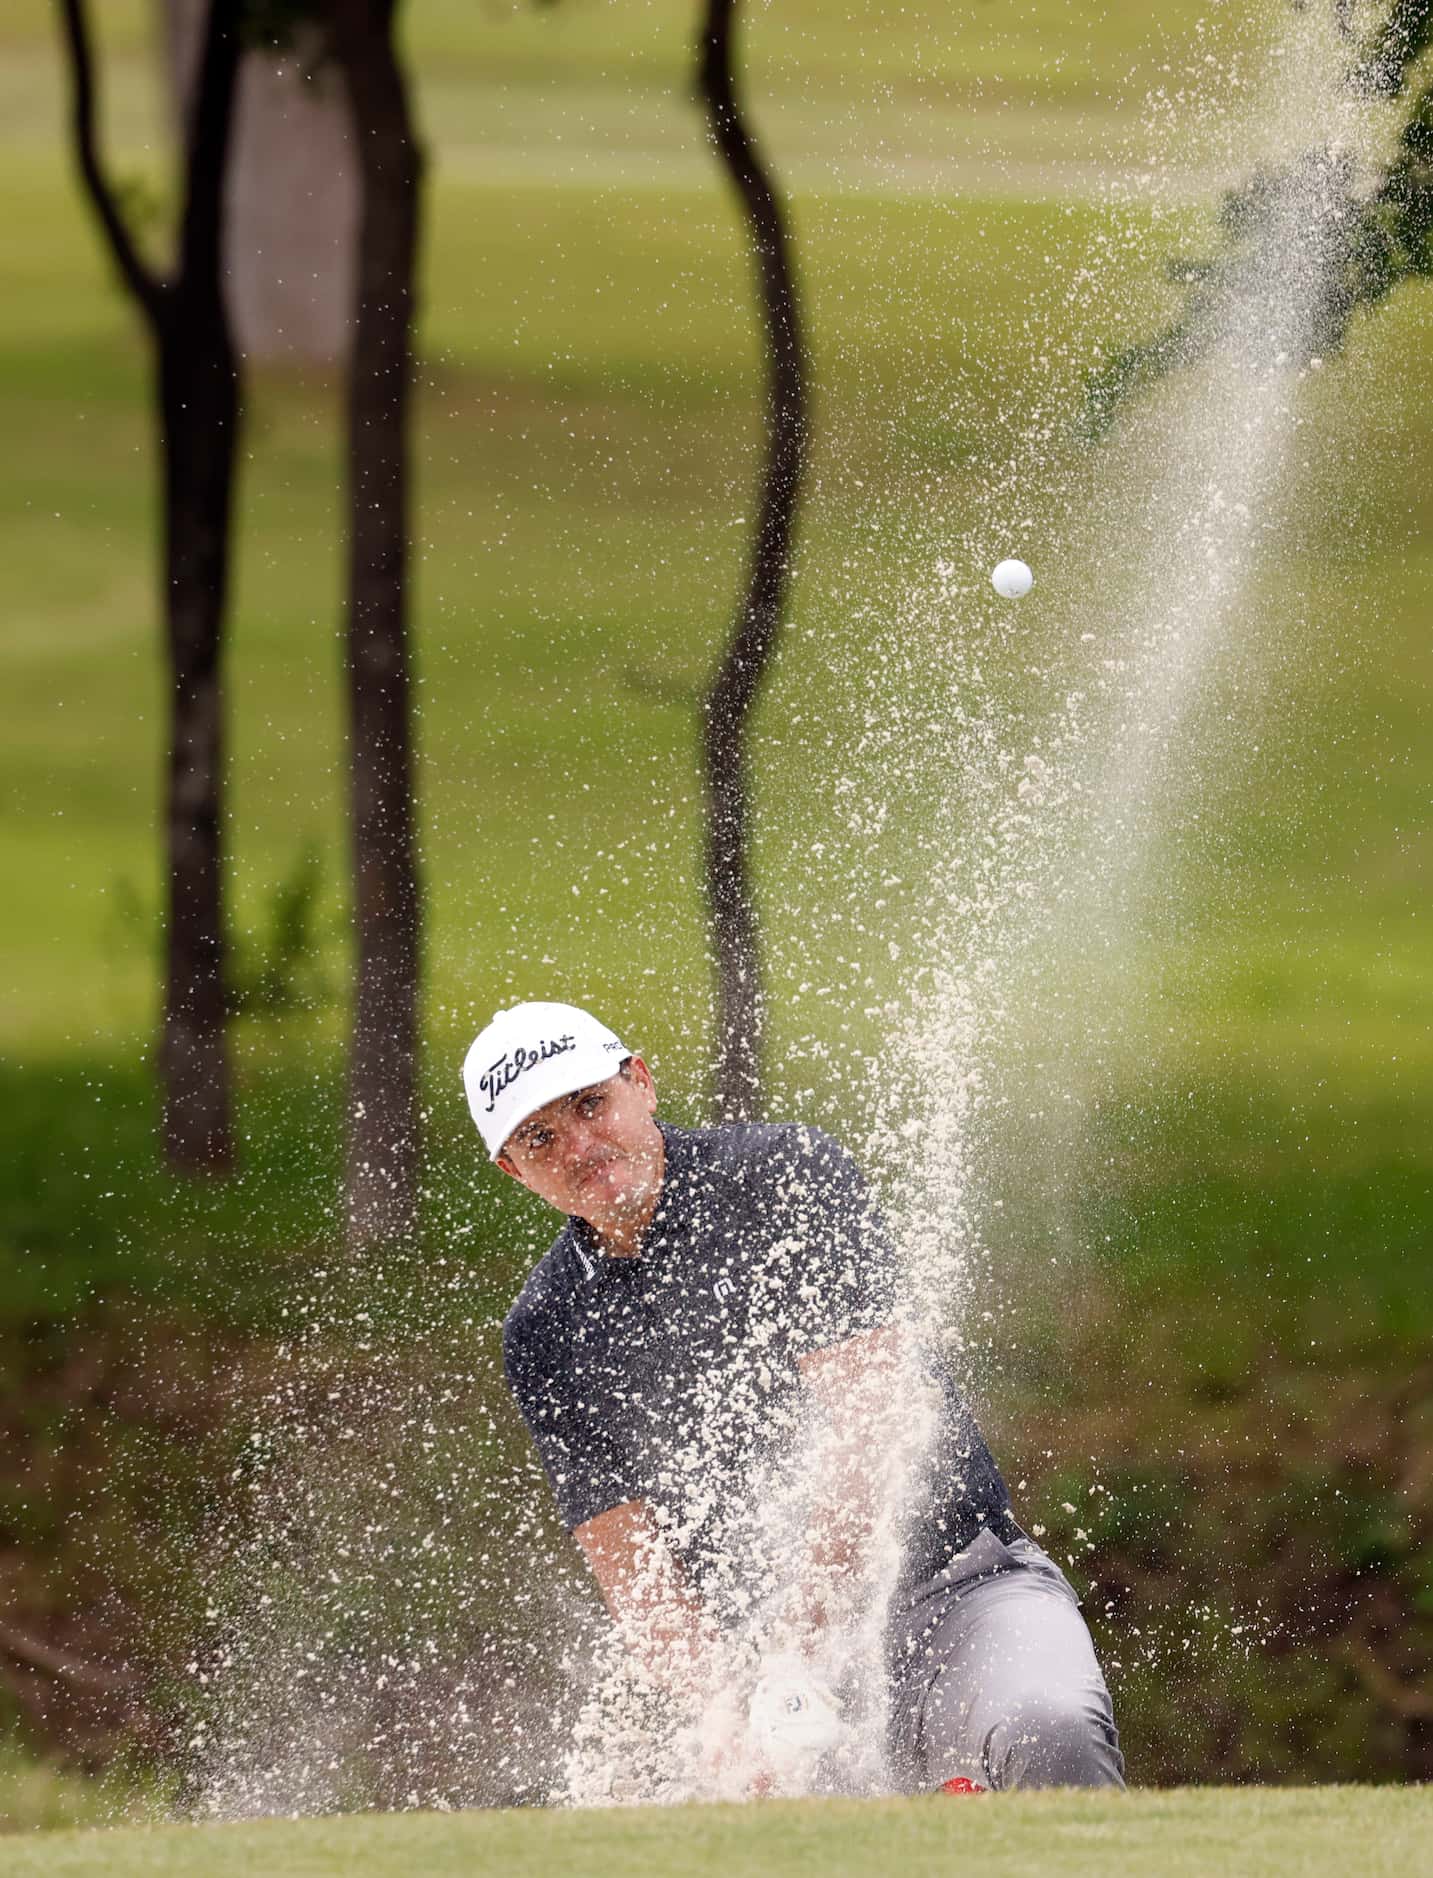 Joseph Bramlett hits out of a bunker on the 7th hole during round 2 of the AT&T Byron Nelson...